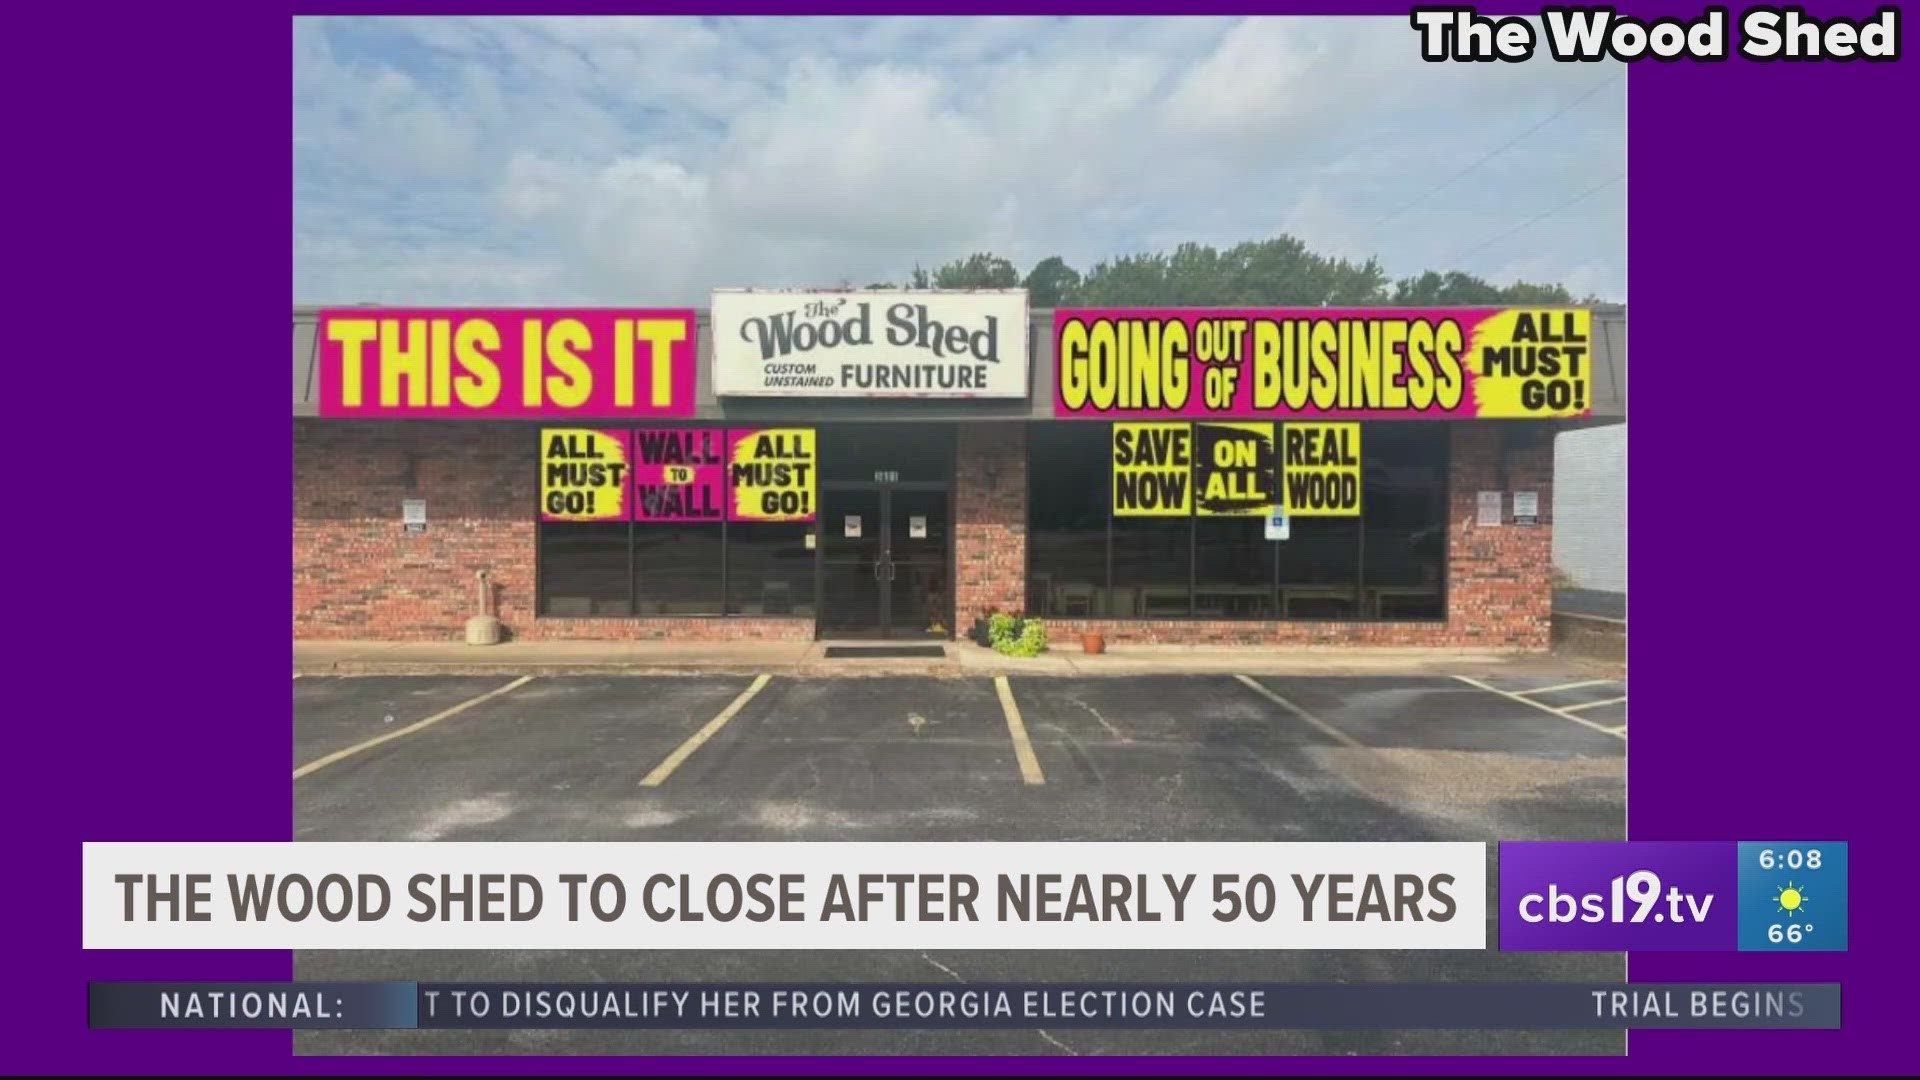 According to their website, The Wood Shed first opened in 1976 under the name Can Do Furniture.